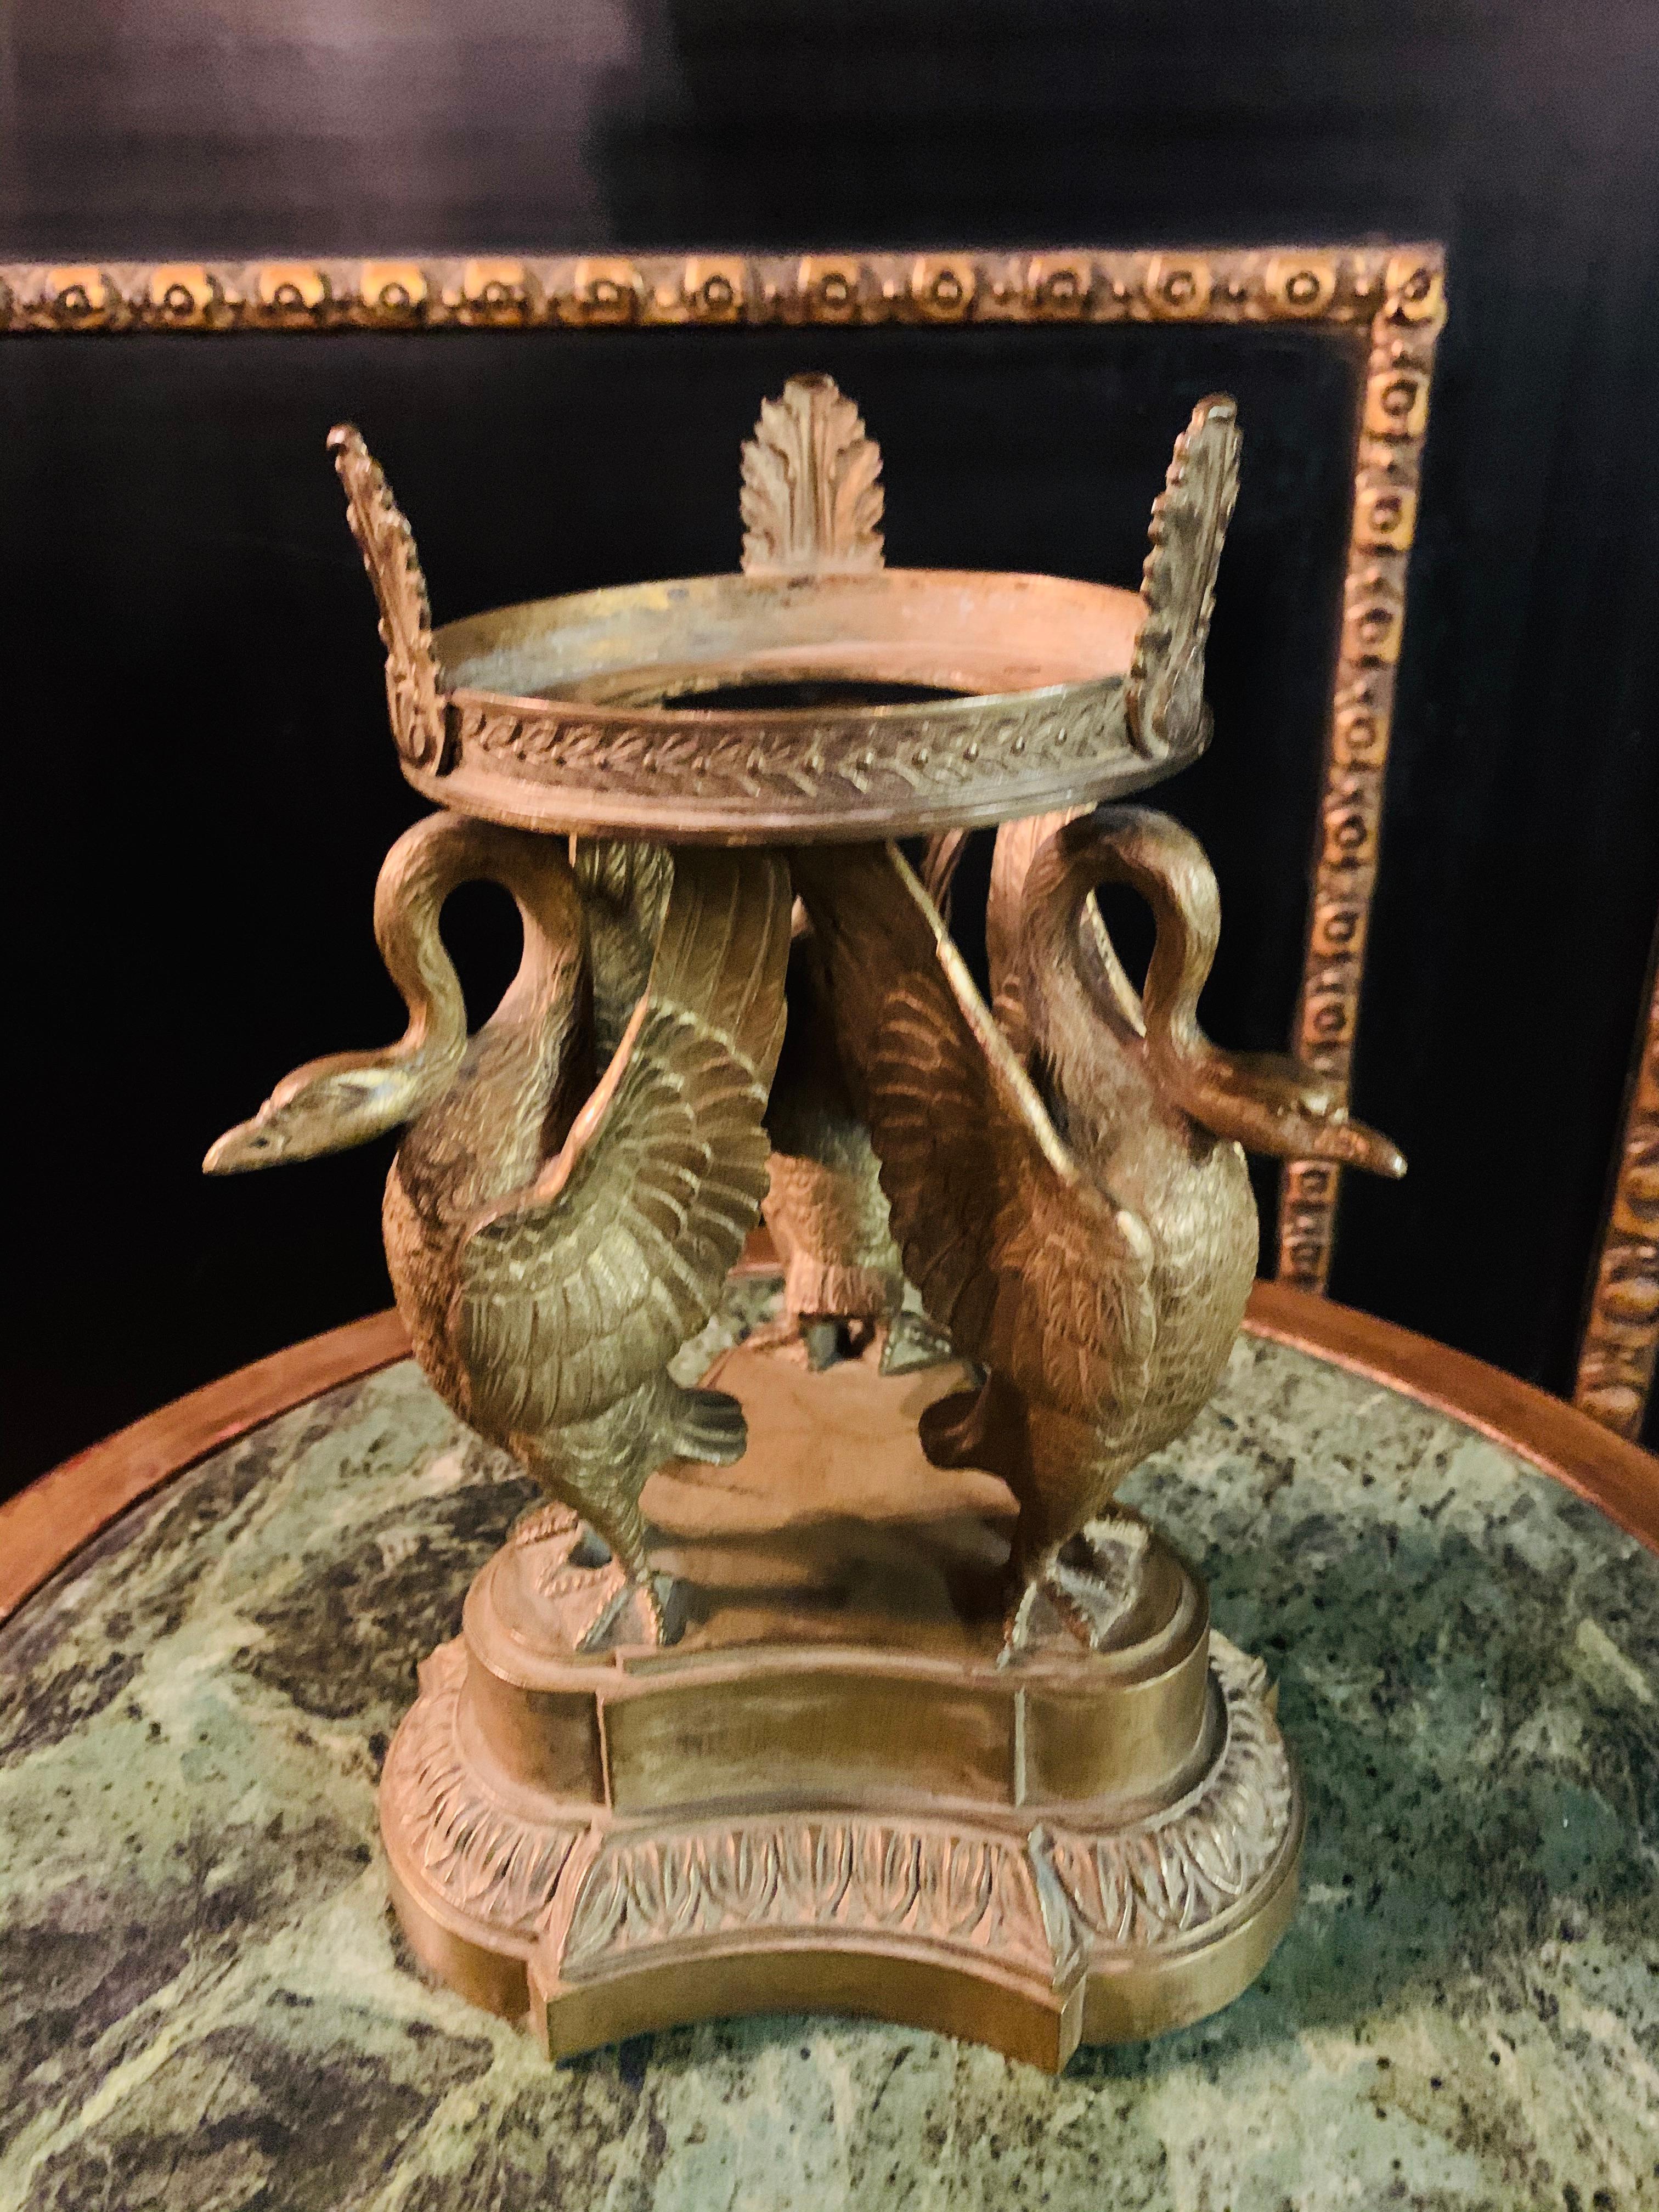 Base of an Empire centerpiece, 19th century bronze with residual gilding. Three-pass, ornamented and profiled postame base. On top of it 3 swans with a wreath on their curved necks and outstretched wings (to accommodate a glass bowl). Gold plating